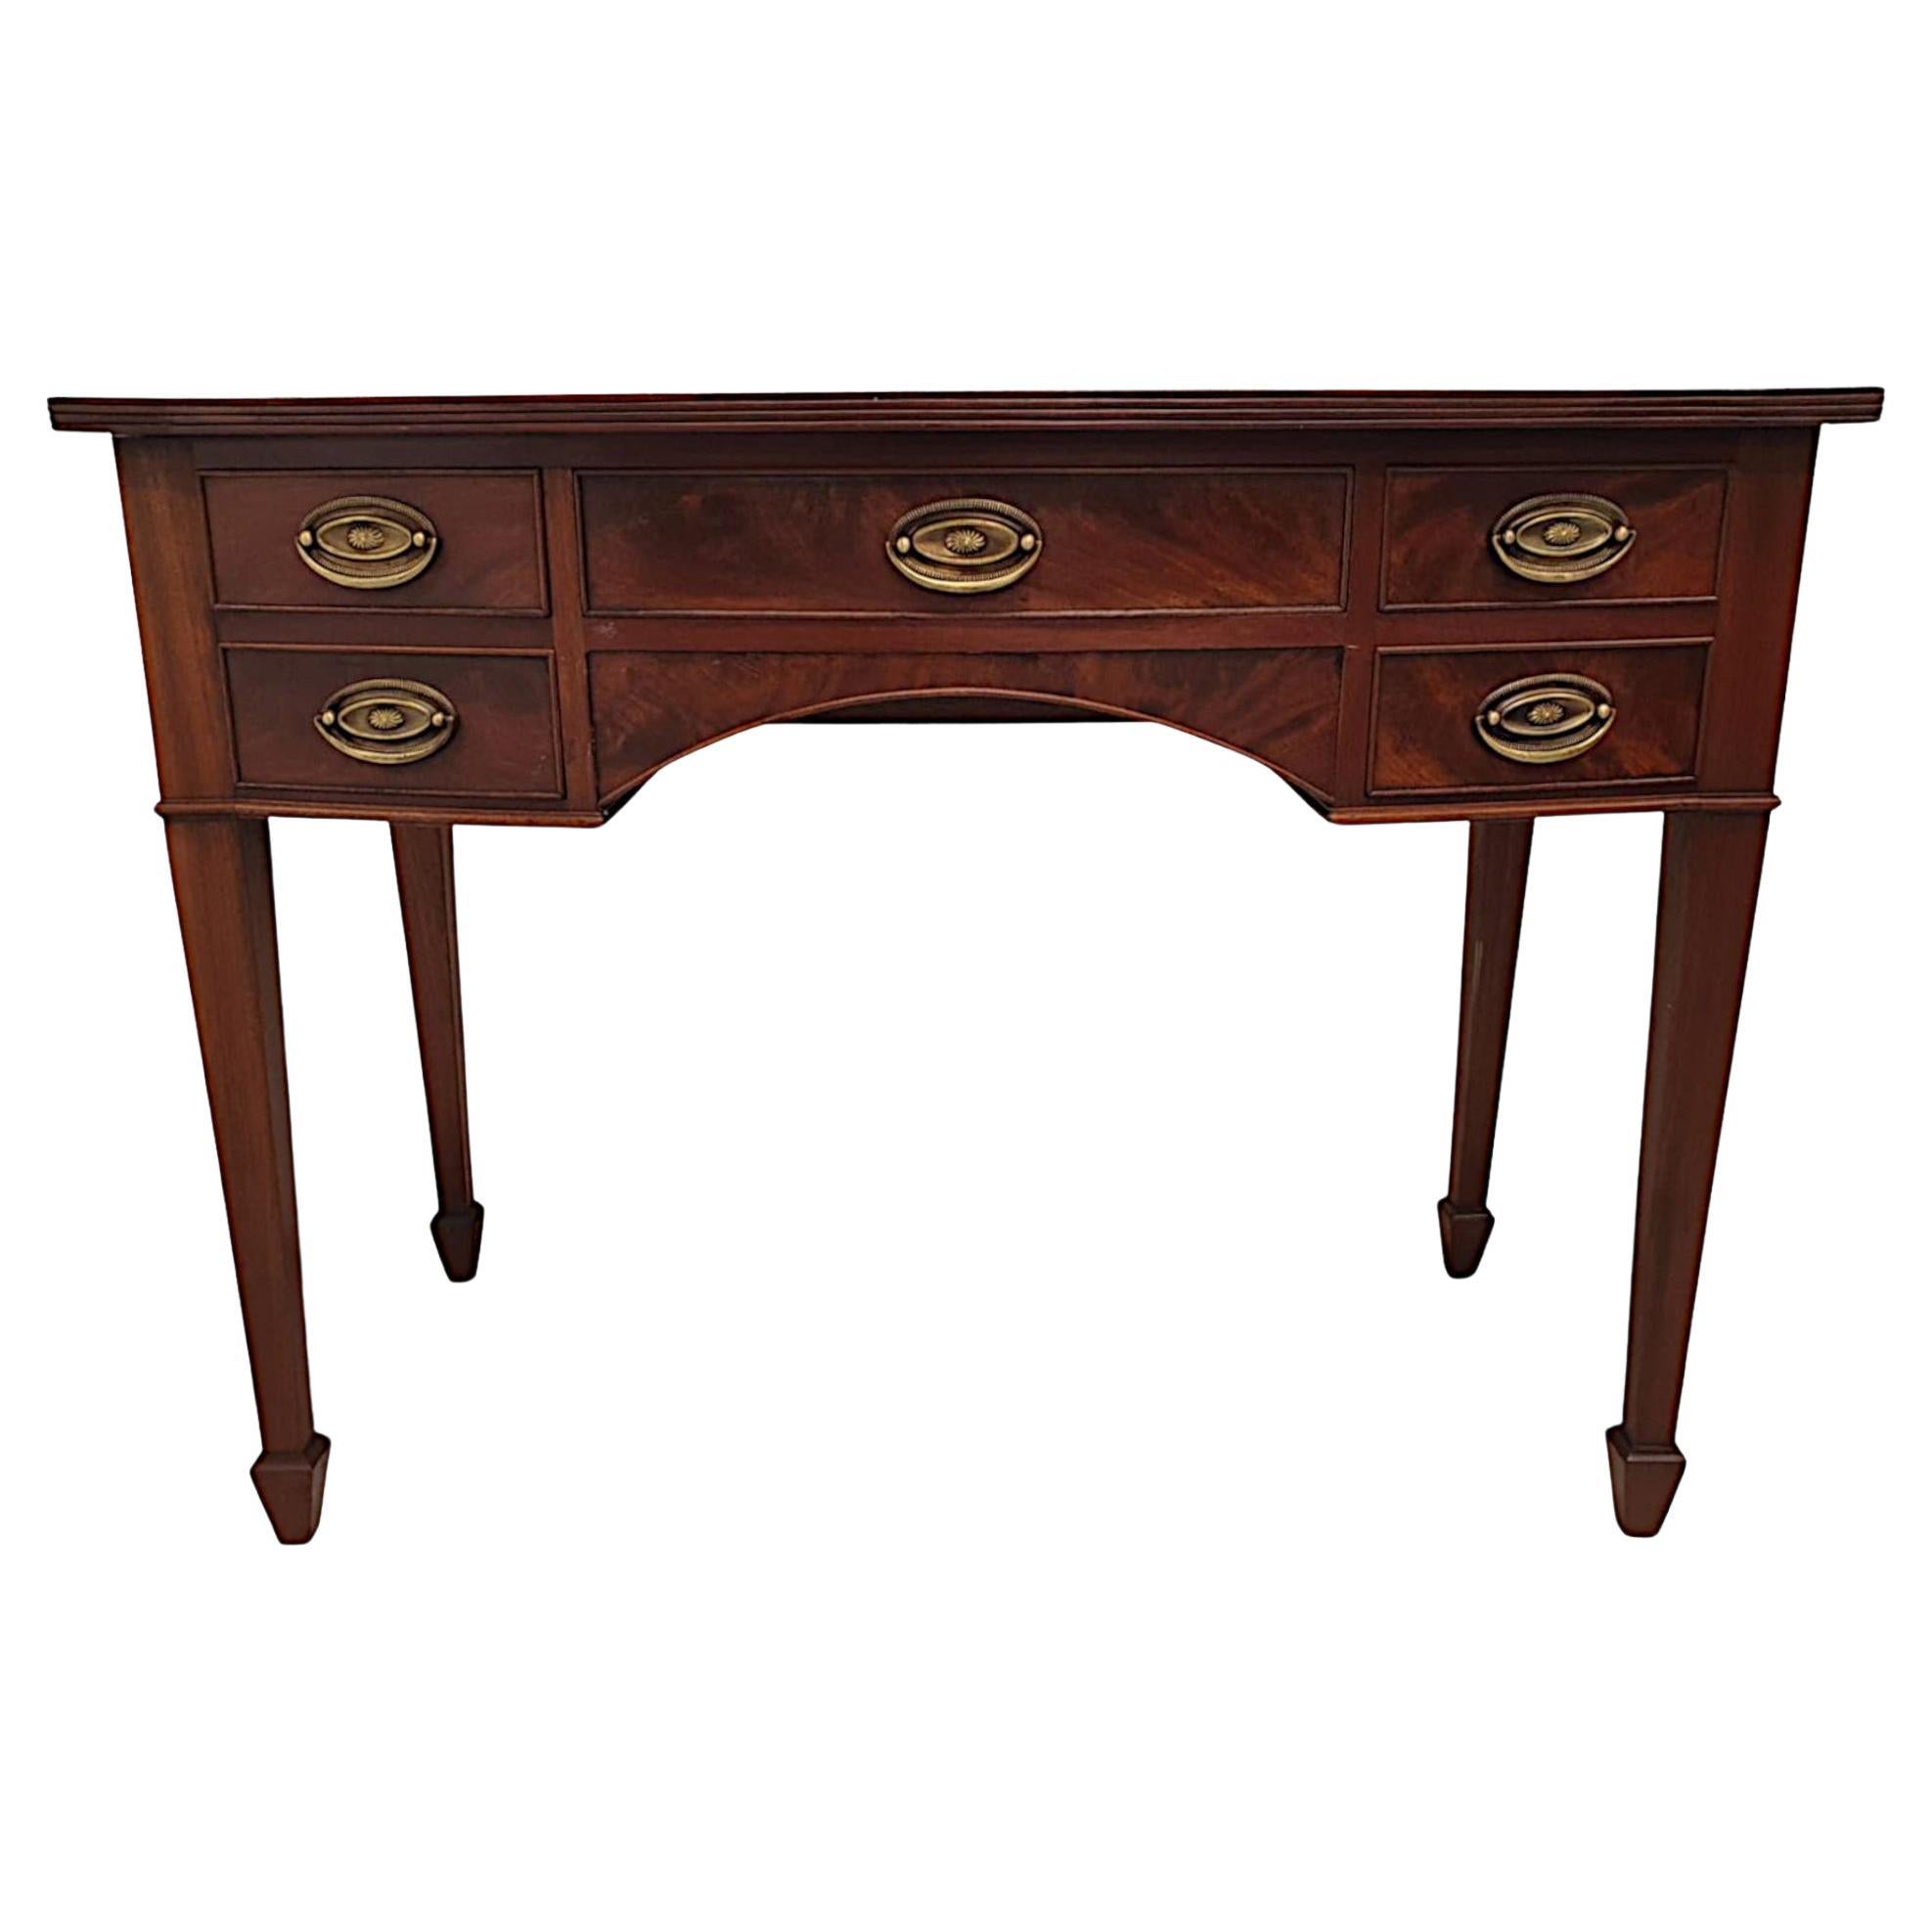 Fabulous Edwardian Console or Hall Table For Sale